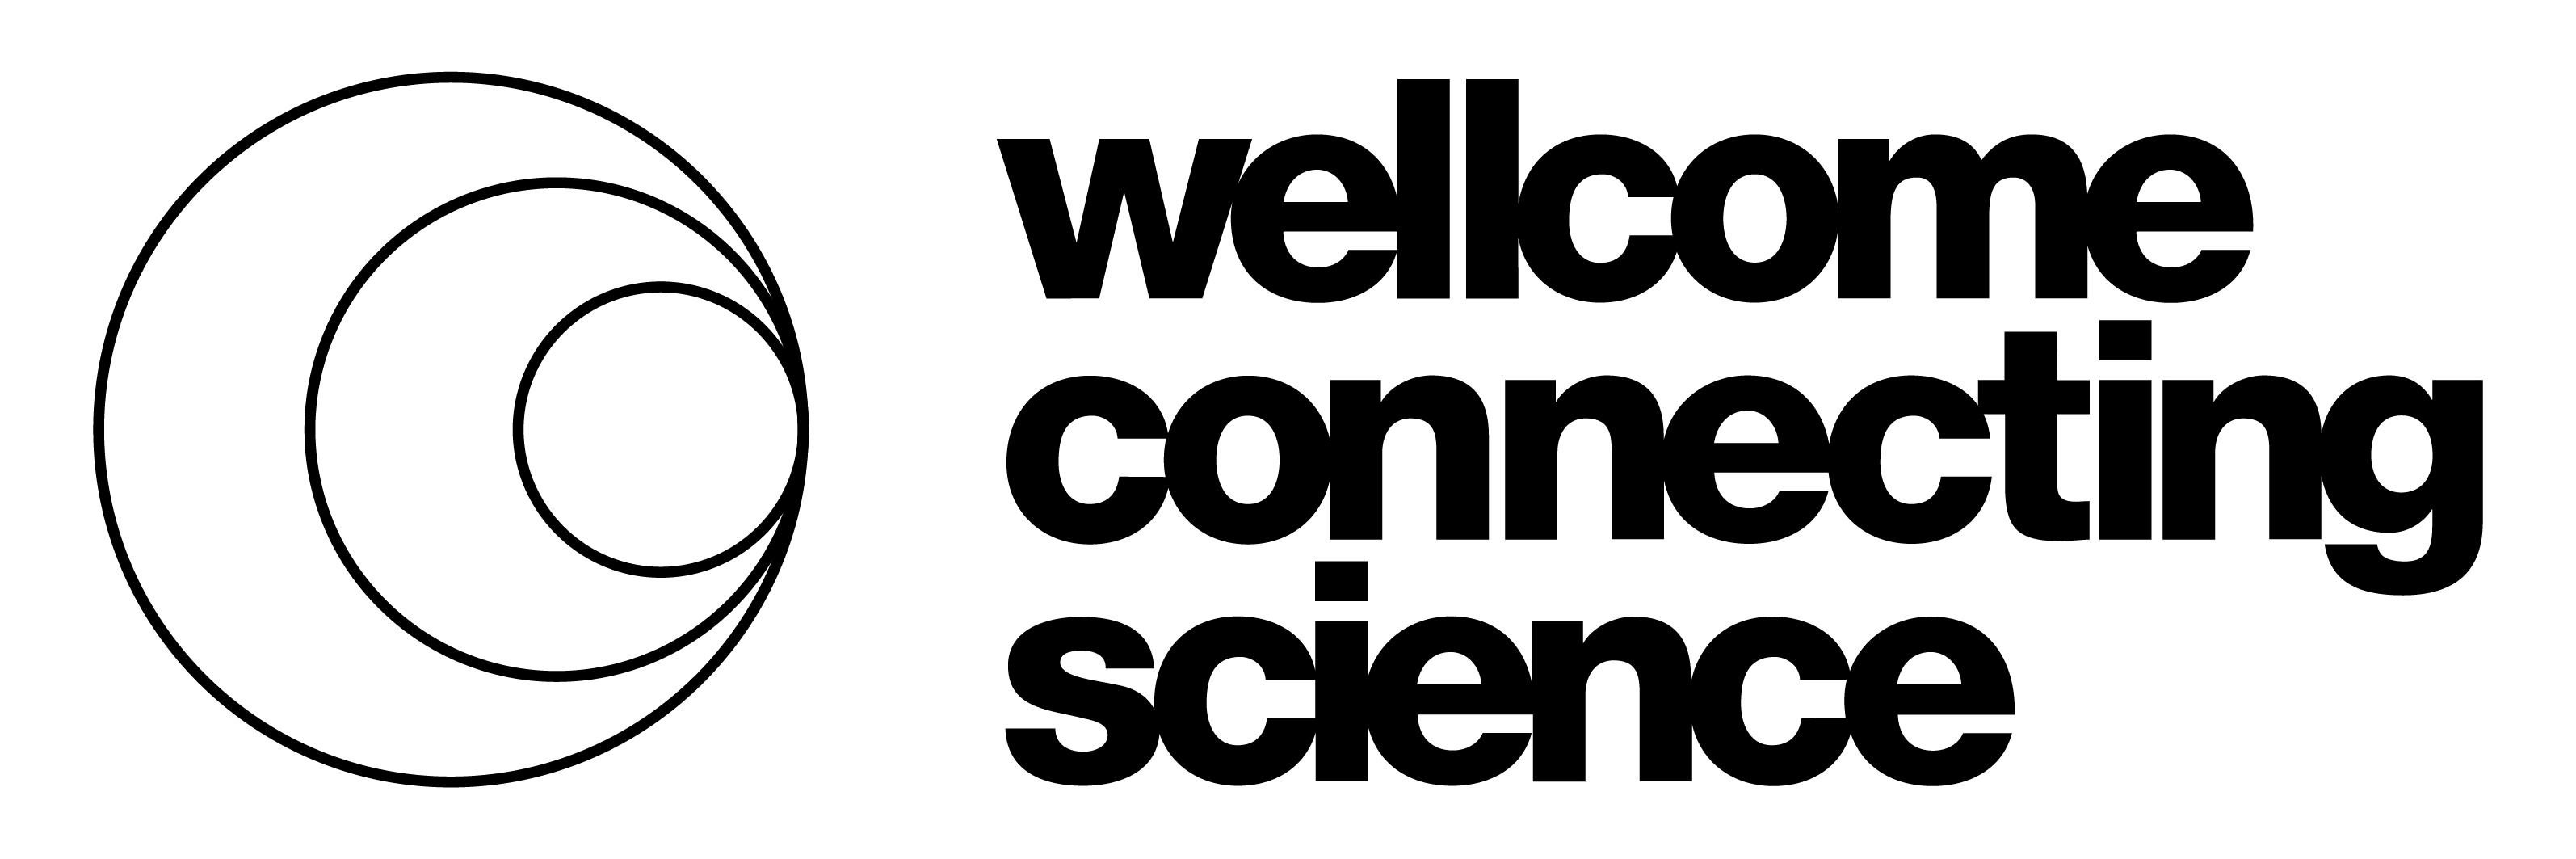 Wellcome Connecting Science LMS